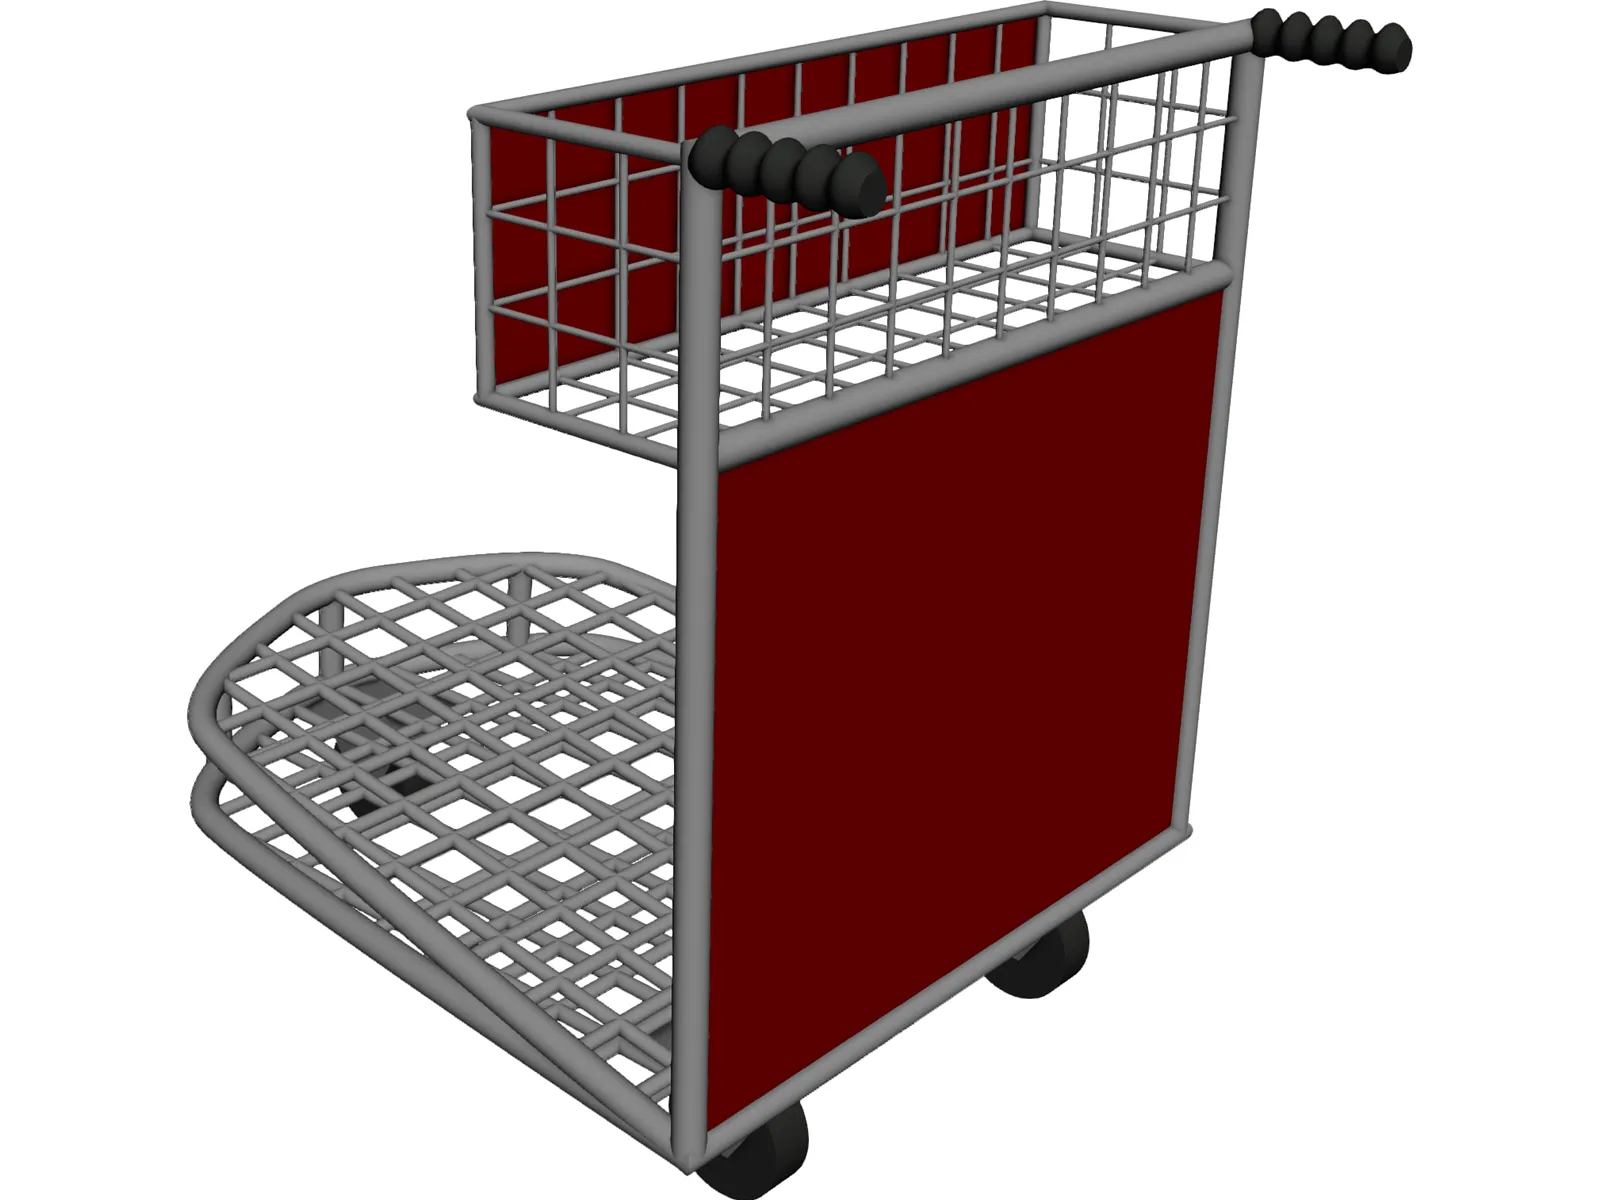 Airport Luggage Cart 3D Model